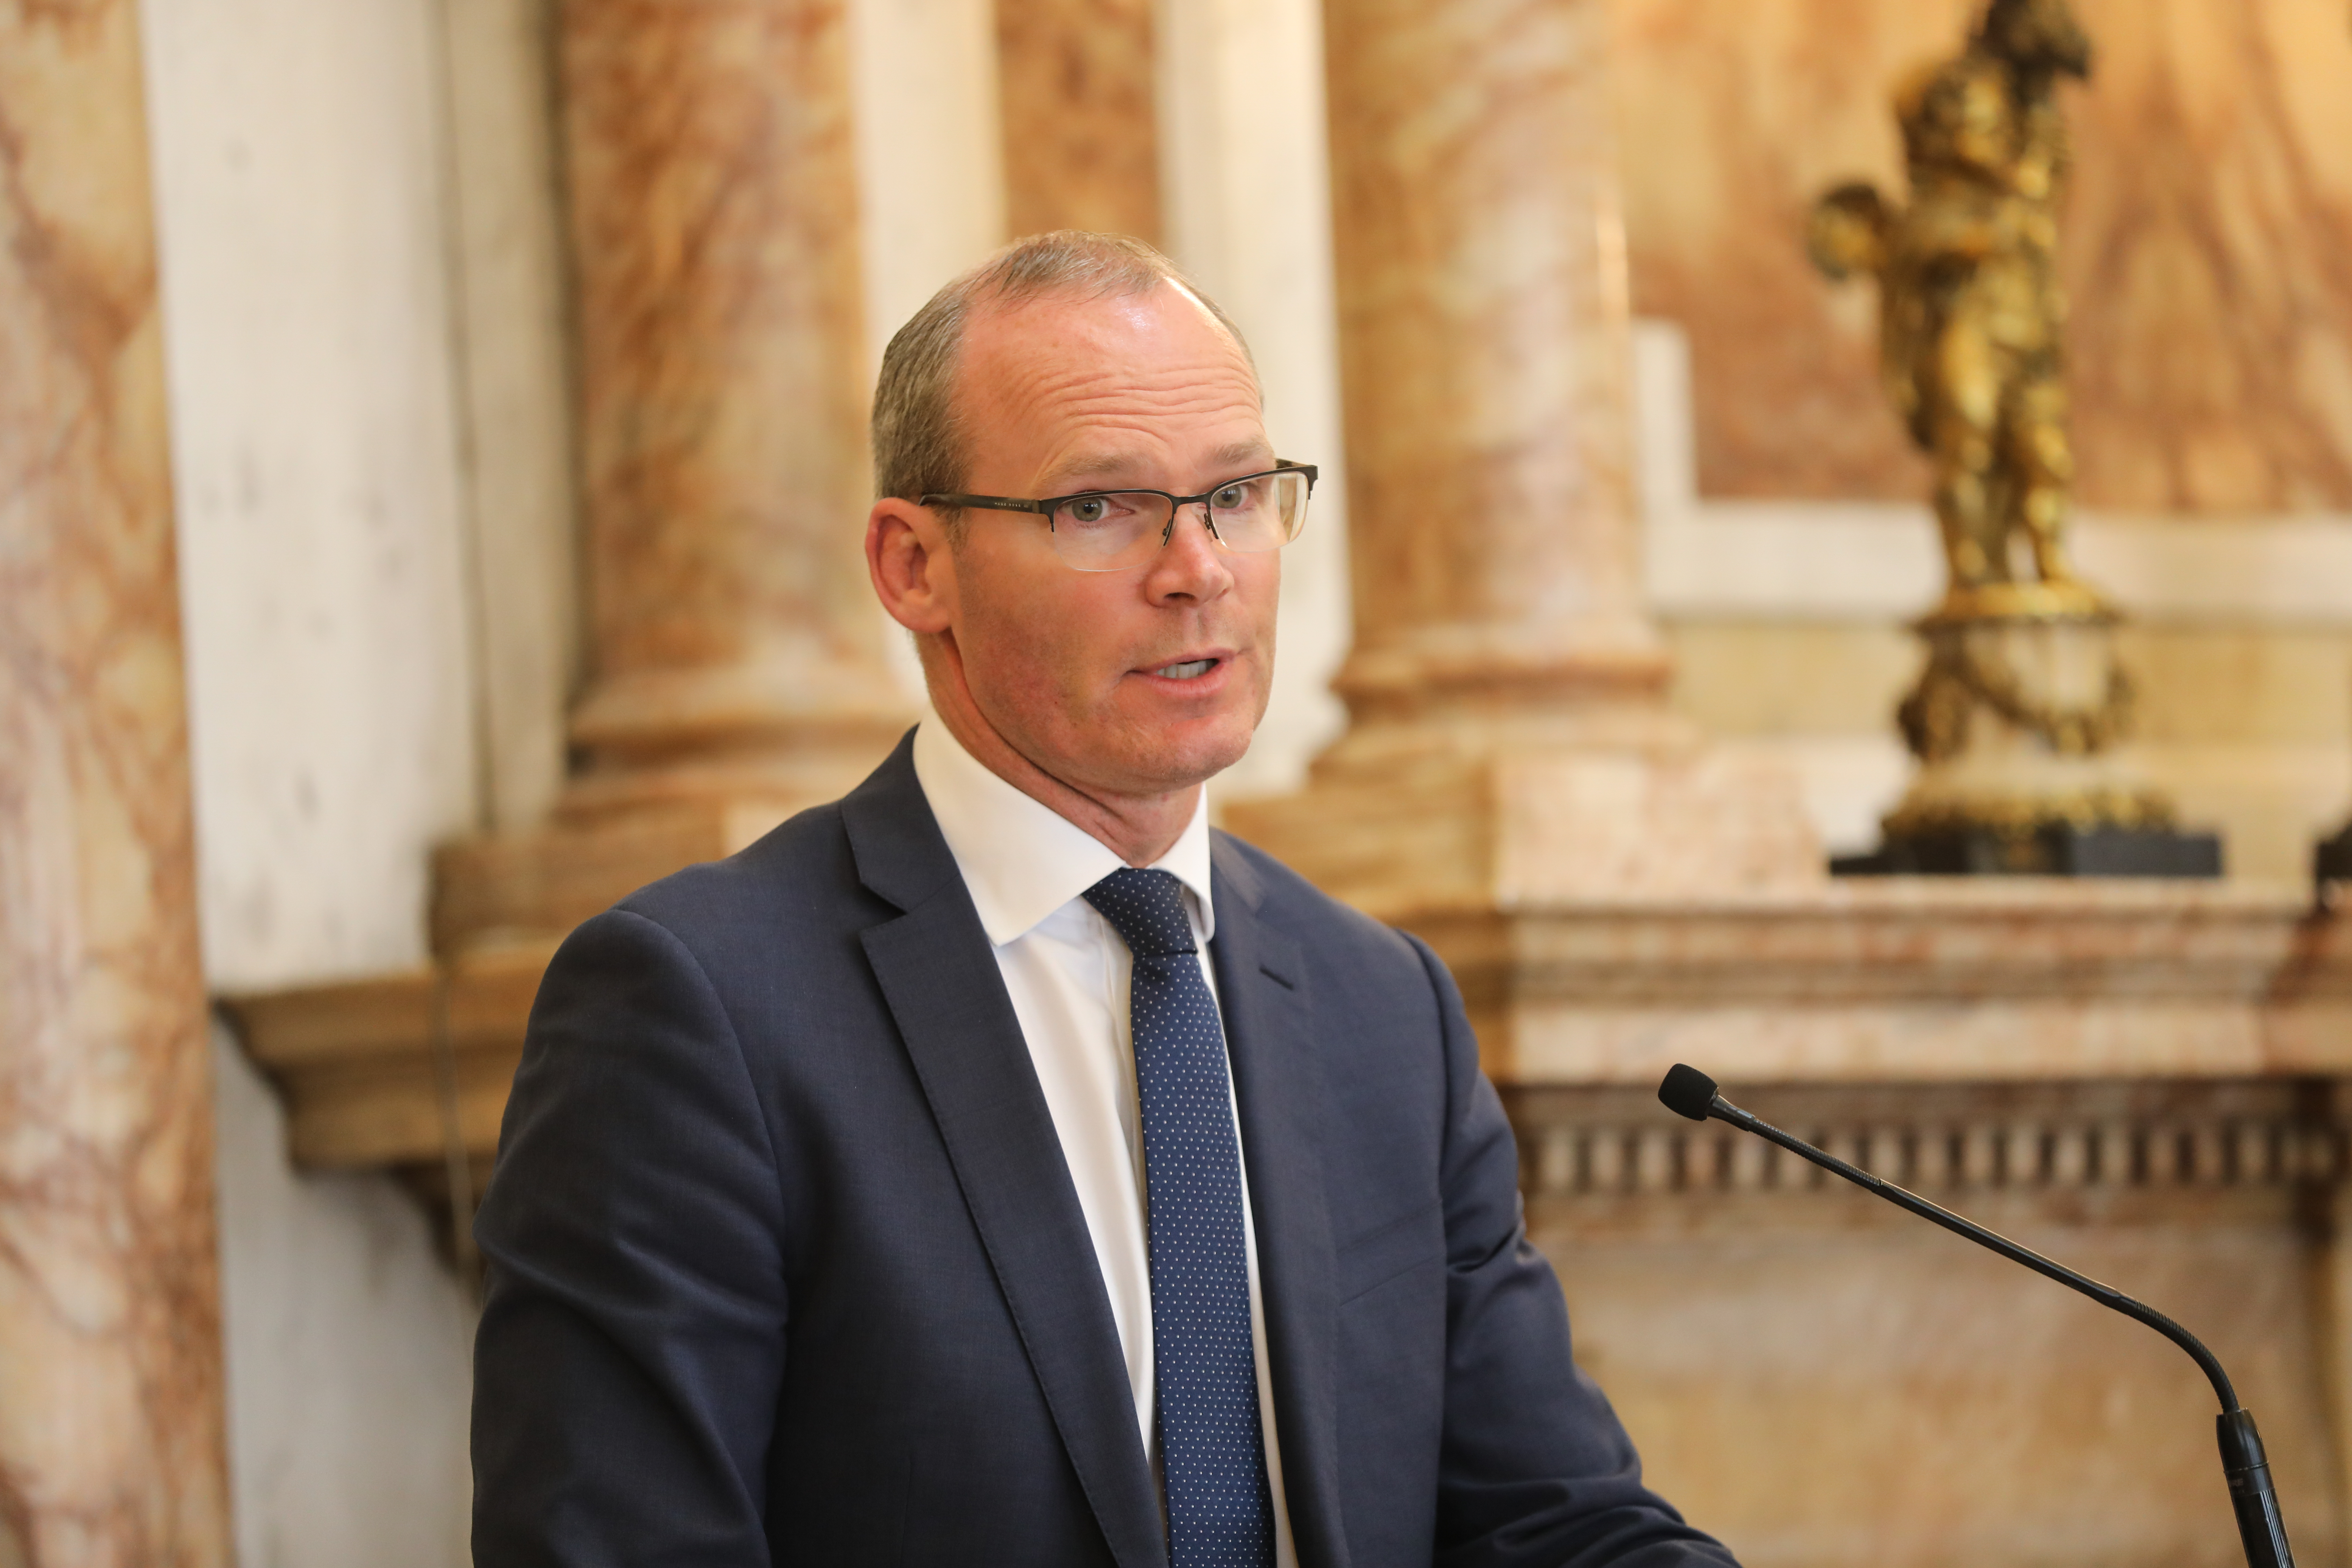 Statement from Tánaiste Simon Coveney after Cabinet